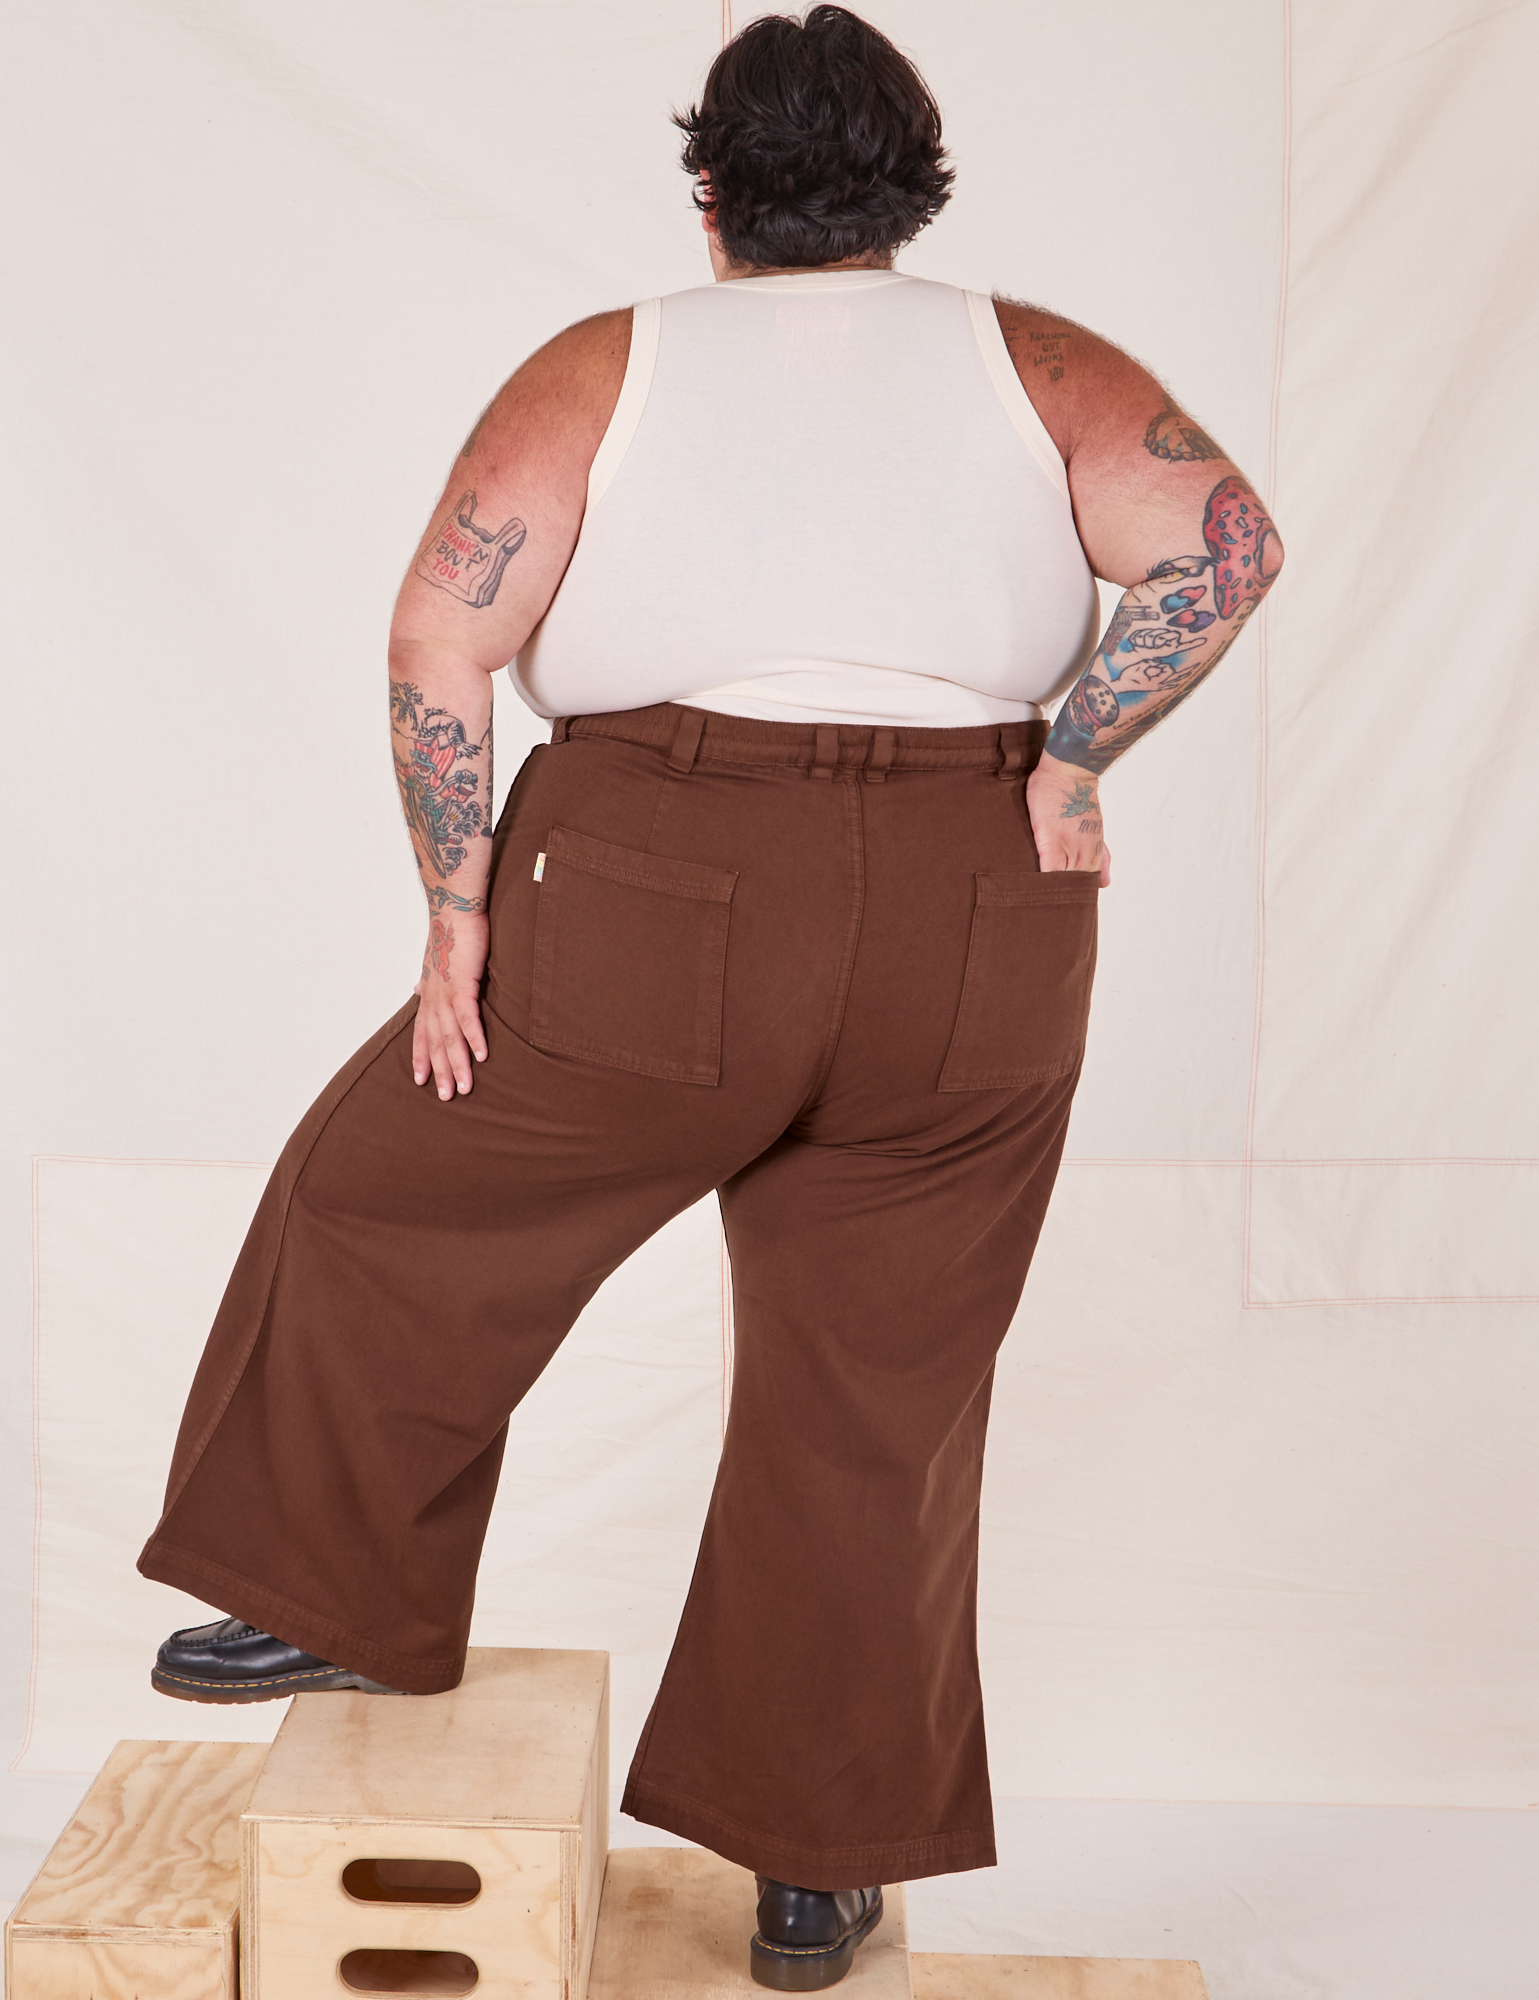 Back view of Bell Bottoms in Fudgesicle Brown and Tank Top in vintage tee off-white on Sam